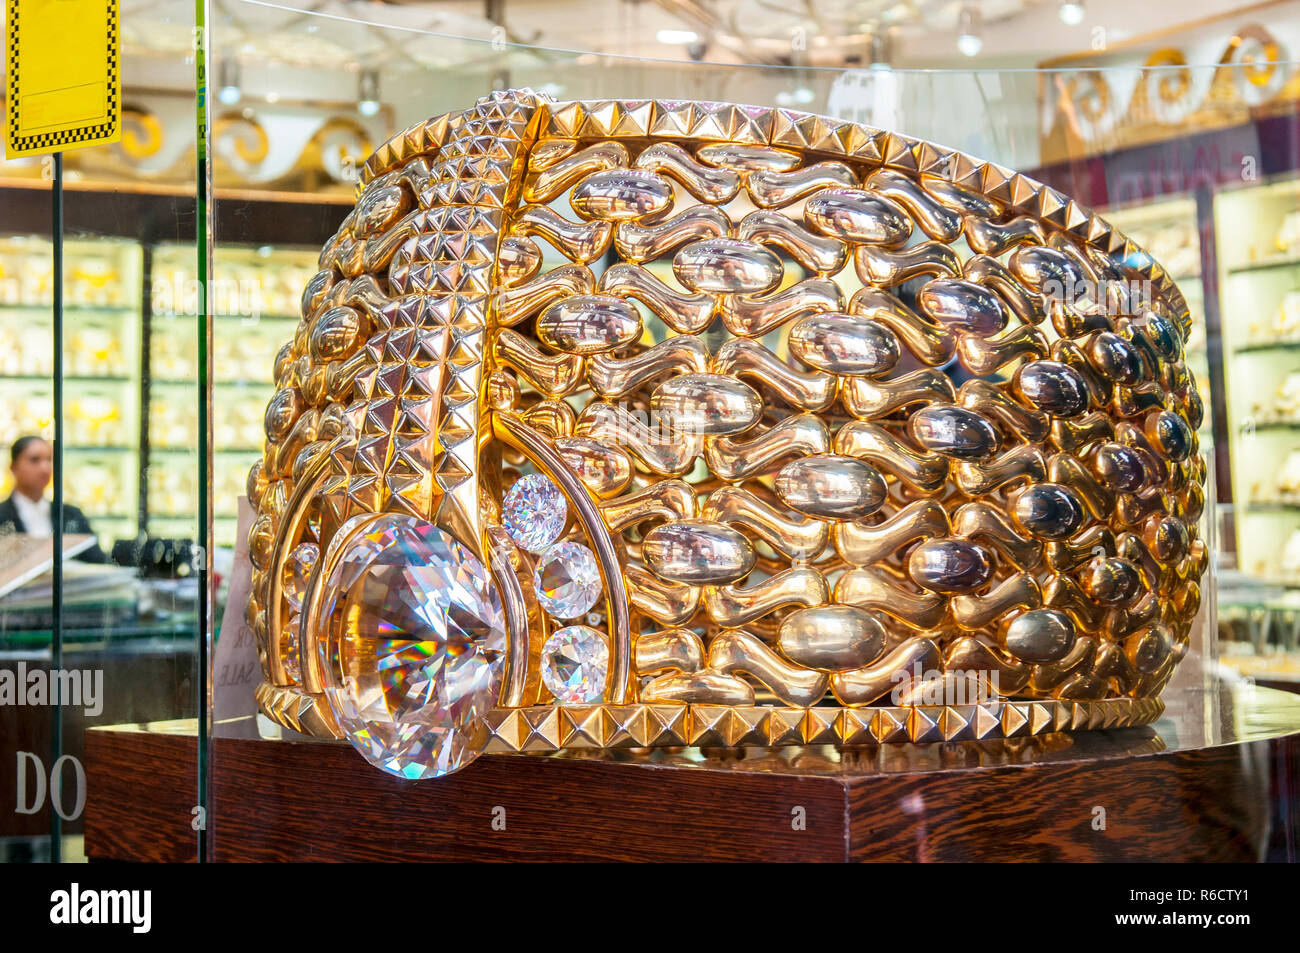 The Biggest Gold Ring In The World, Largest And Heaviest Gold Ring, Dubai,  United Arab Emirates Stock Photo - Alamy